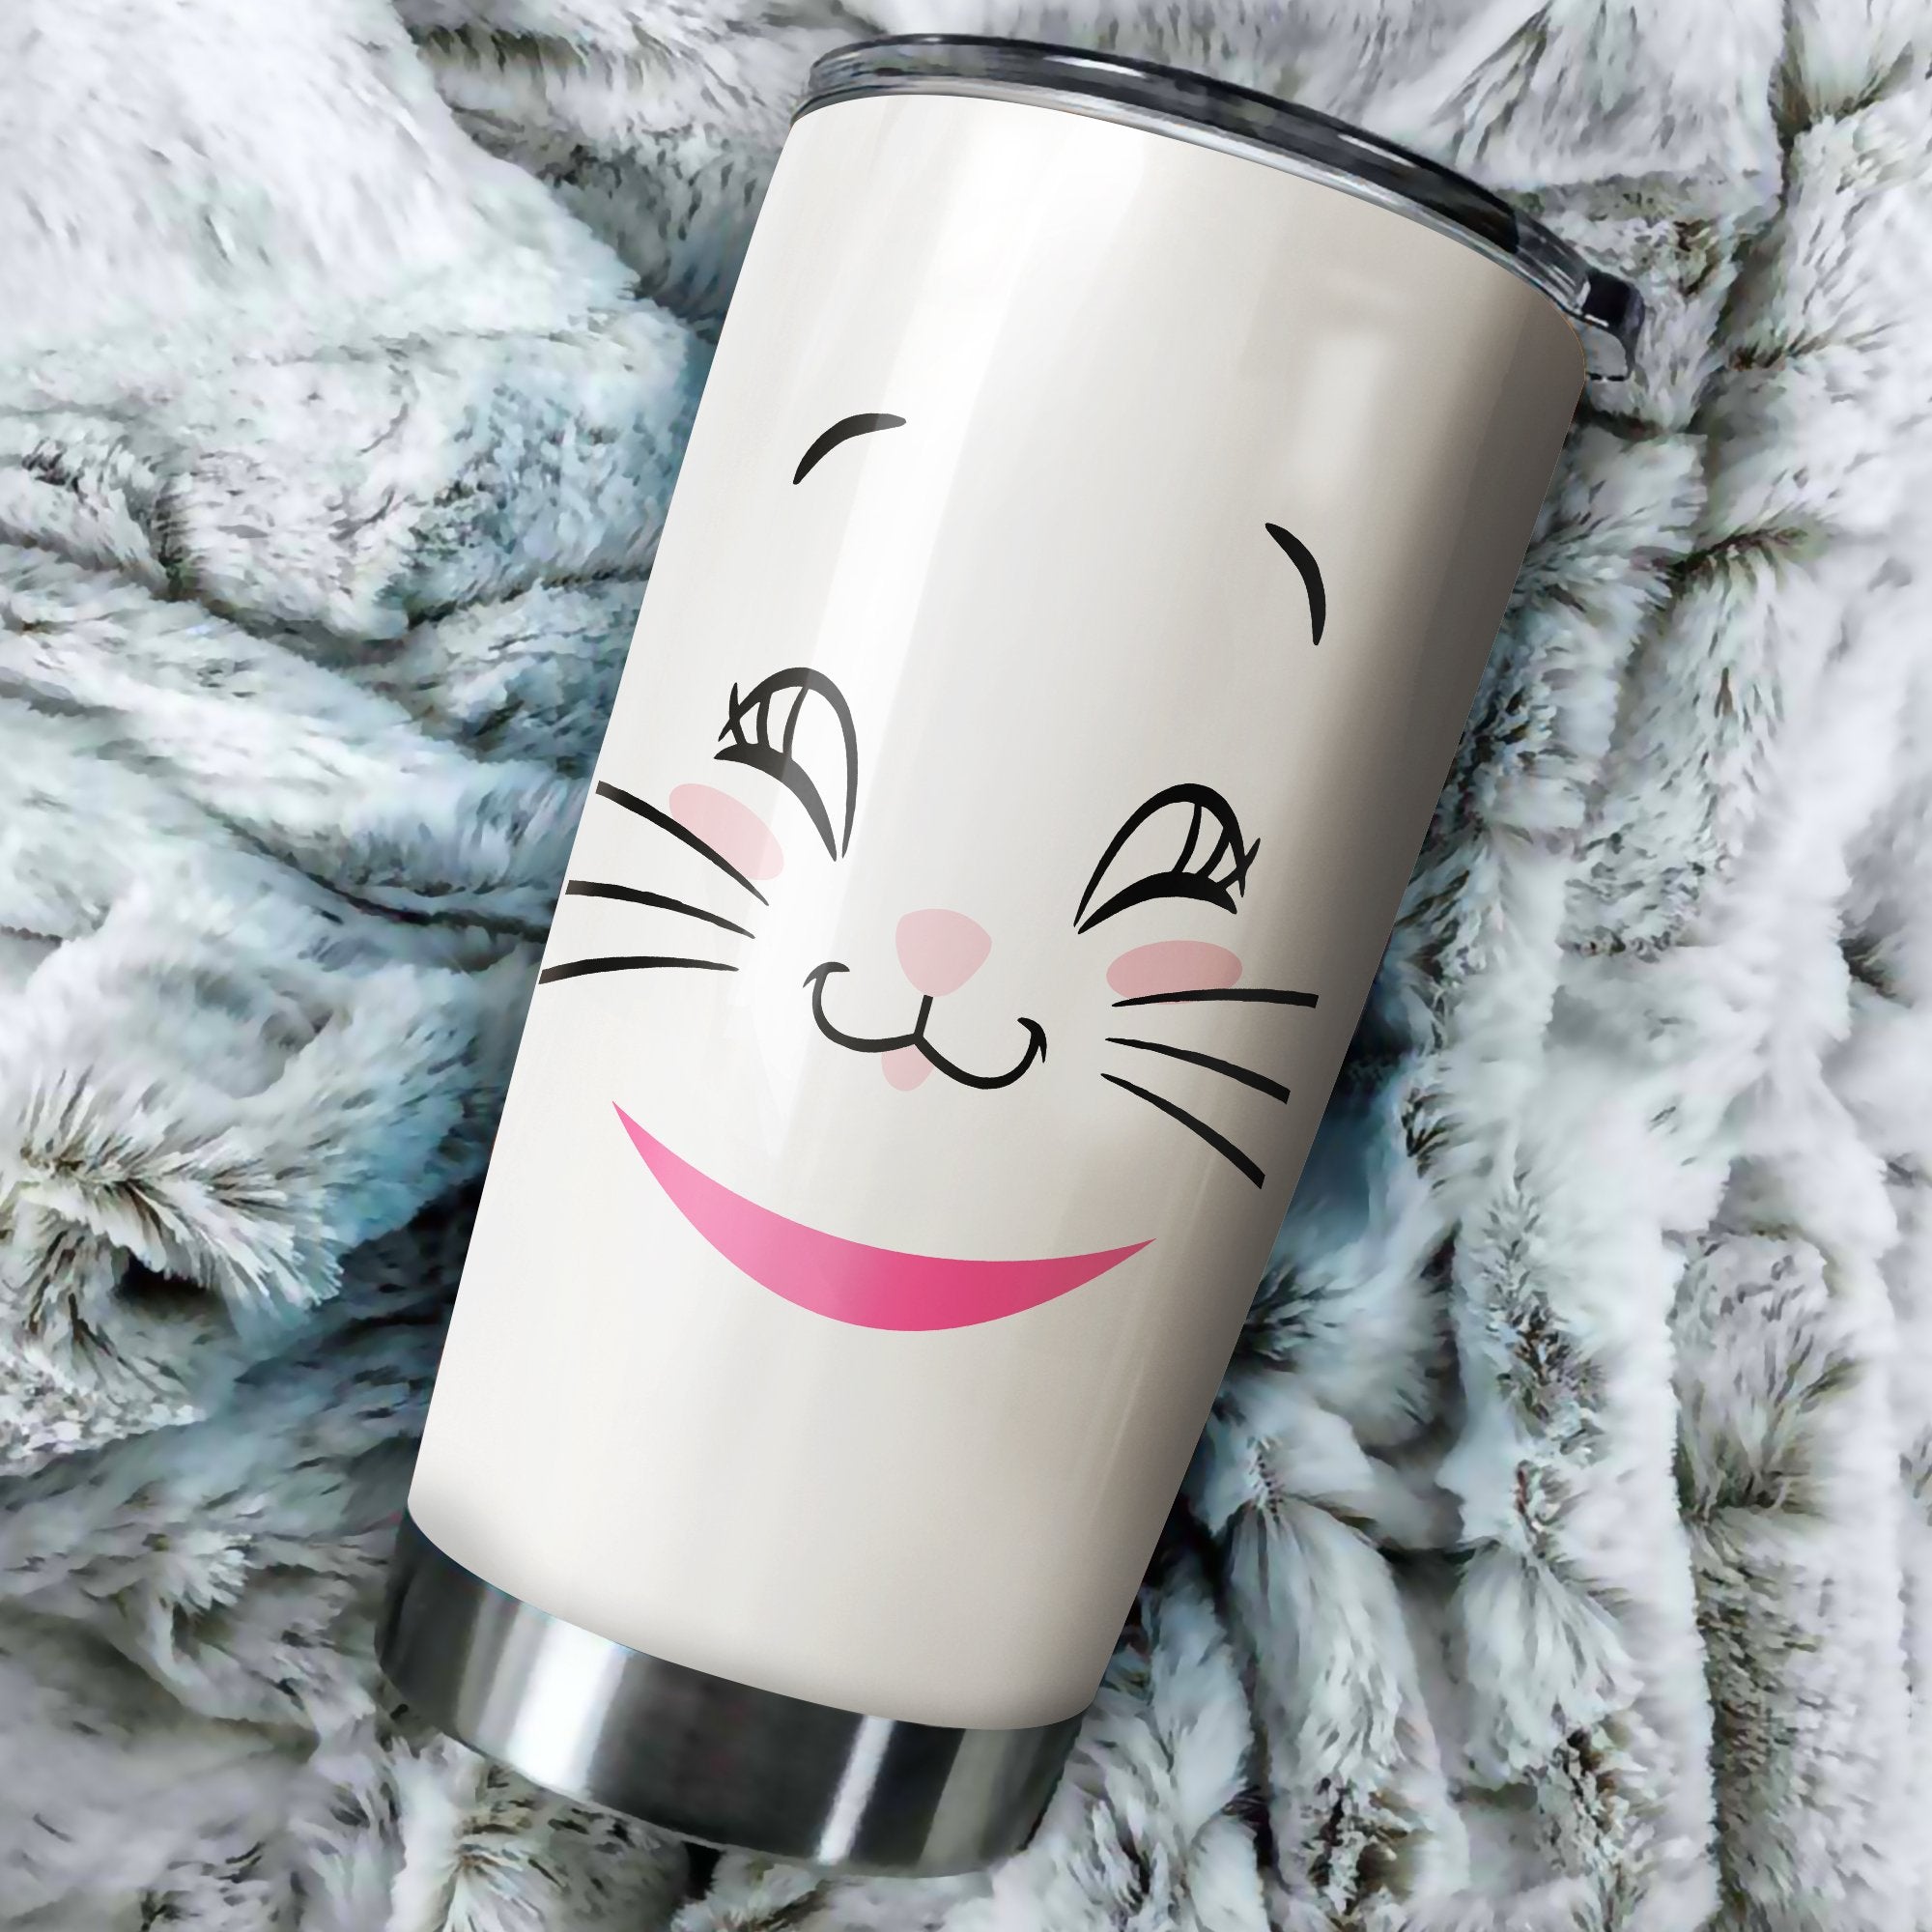 Cute Cat Face Tumbler Best Perfect Gift Idea Stainless Traveling Mugs 2021